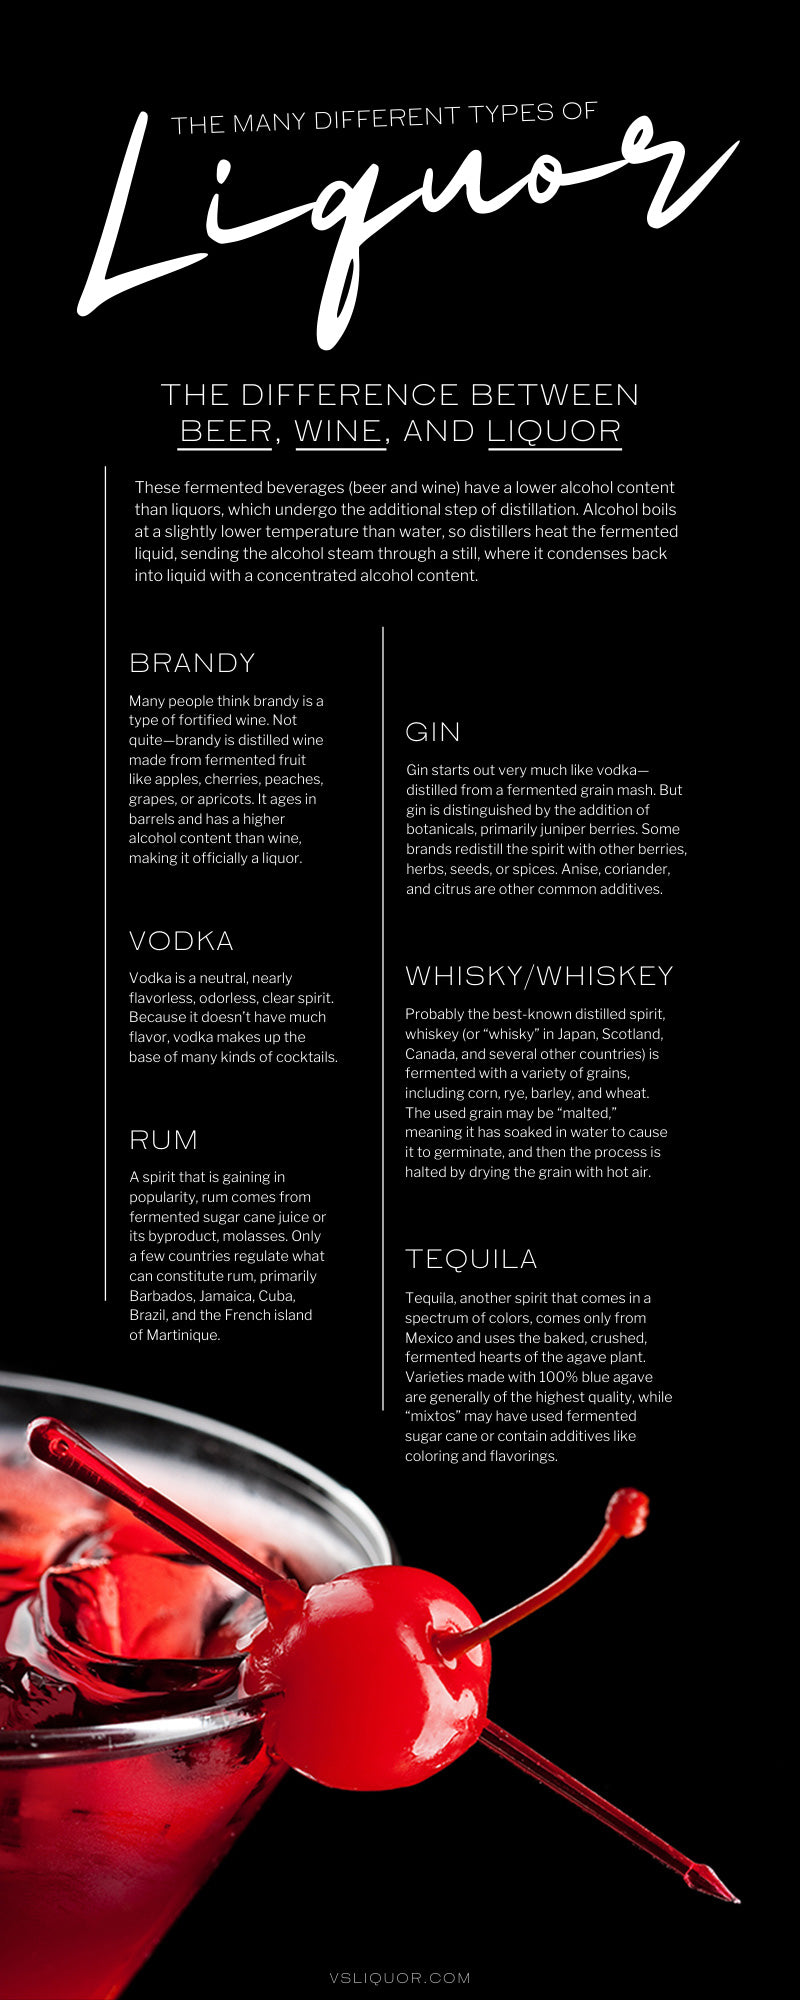 The Many Different Types of Liquor - VS